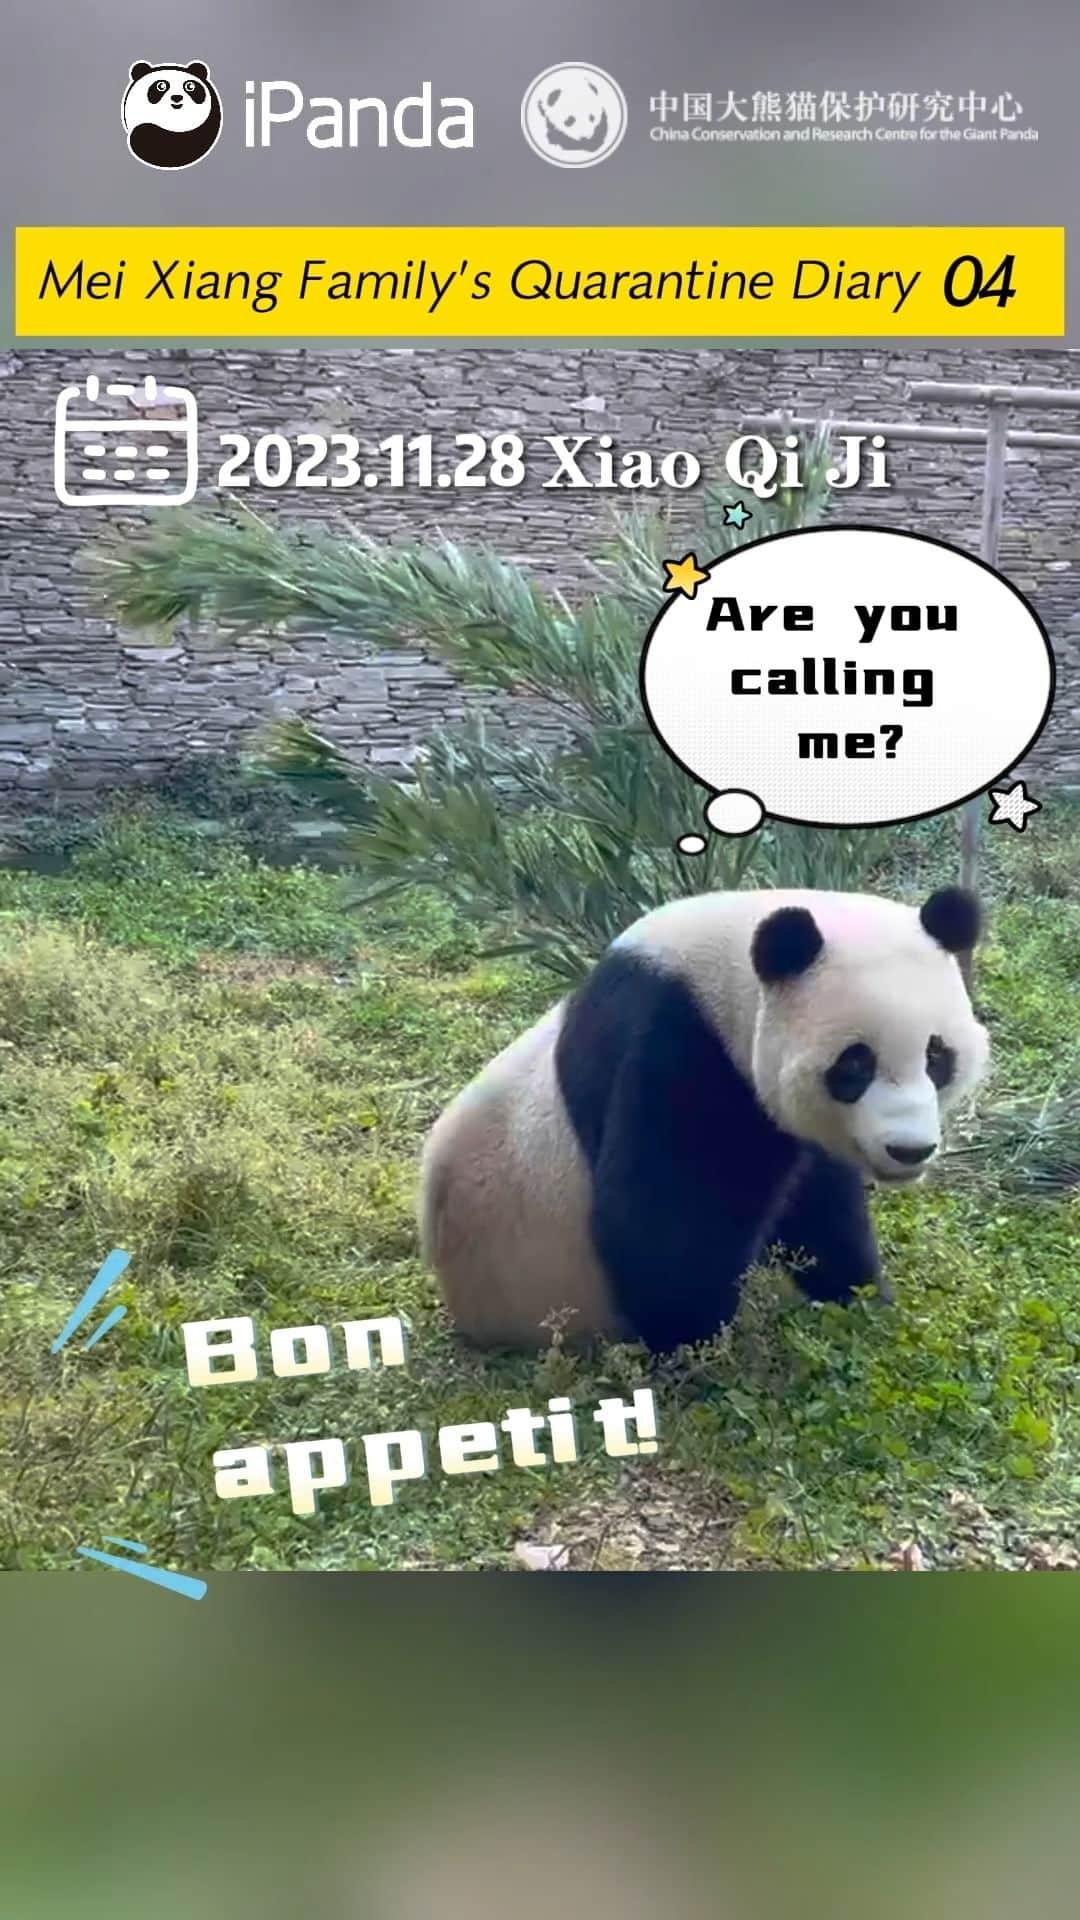 iPandaのインスタグラム：「Mei Xiang’s family returned home for almost a month. As you look forward to meeting them offline, how much do you know about their preferences and little secrets? And who will be the heaviest among these three? In the latest quarantine diary, we reveal more stories about Mei Xiang’s family for you! 🐼 🐼 🐼 #Panda #iPanda #Cute #CCRCGP #PandaNews #ChinaUS #FriendshipMessenger #ReturnOfPandas #pandastory #pandaxiaoqiji #pandameixiang #pandatiantian #littlemiracle  For more panda information, please check out: https://en.ipanda.com」